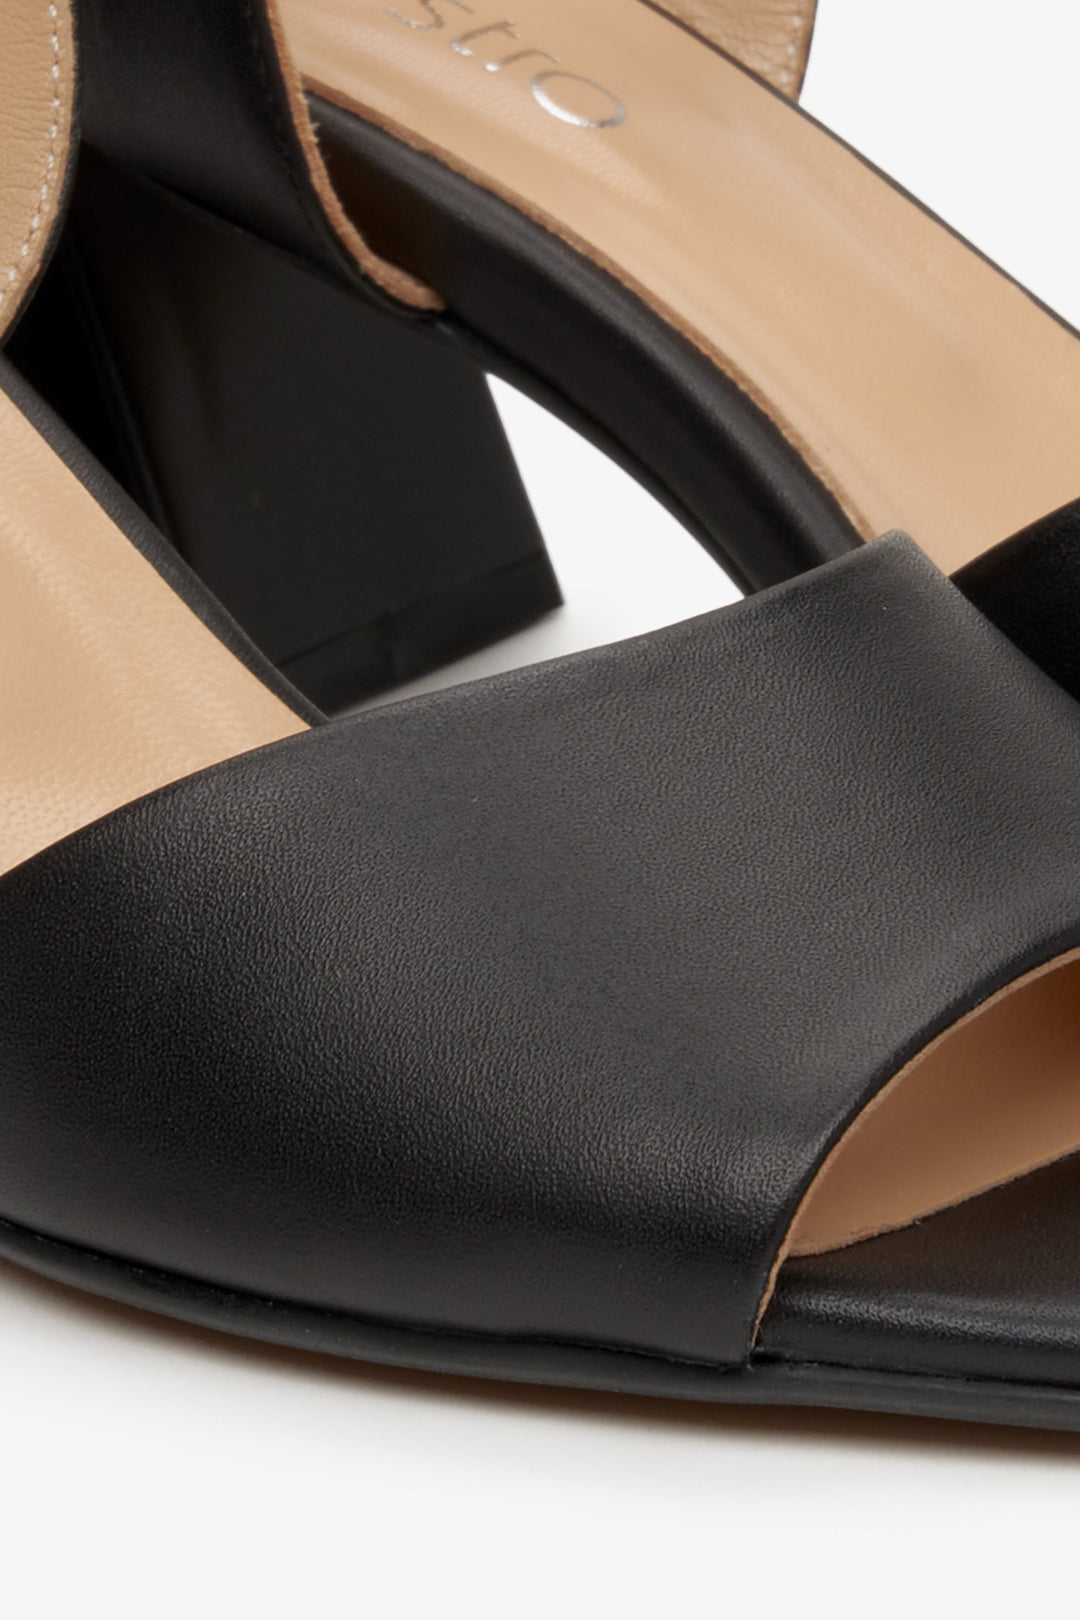 Women's black leather heeled sandals by Estro - a close-up on the details.